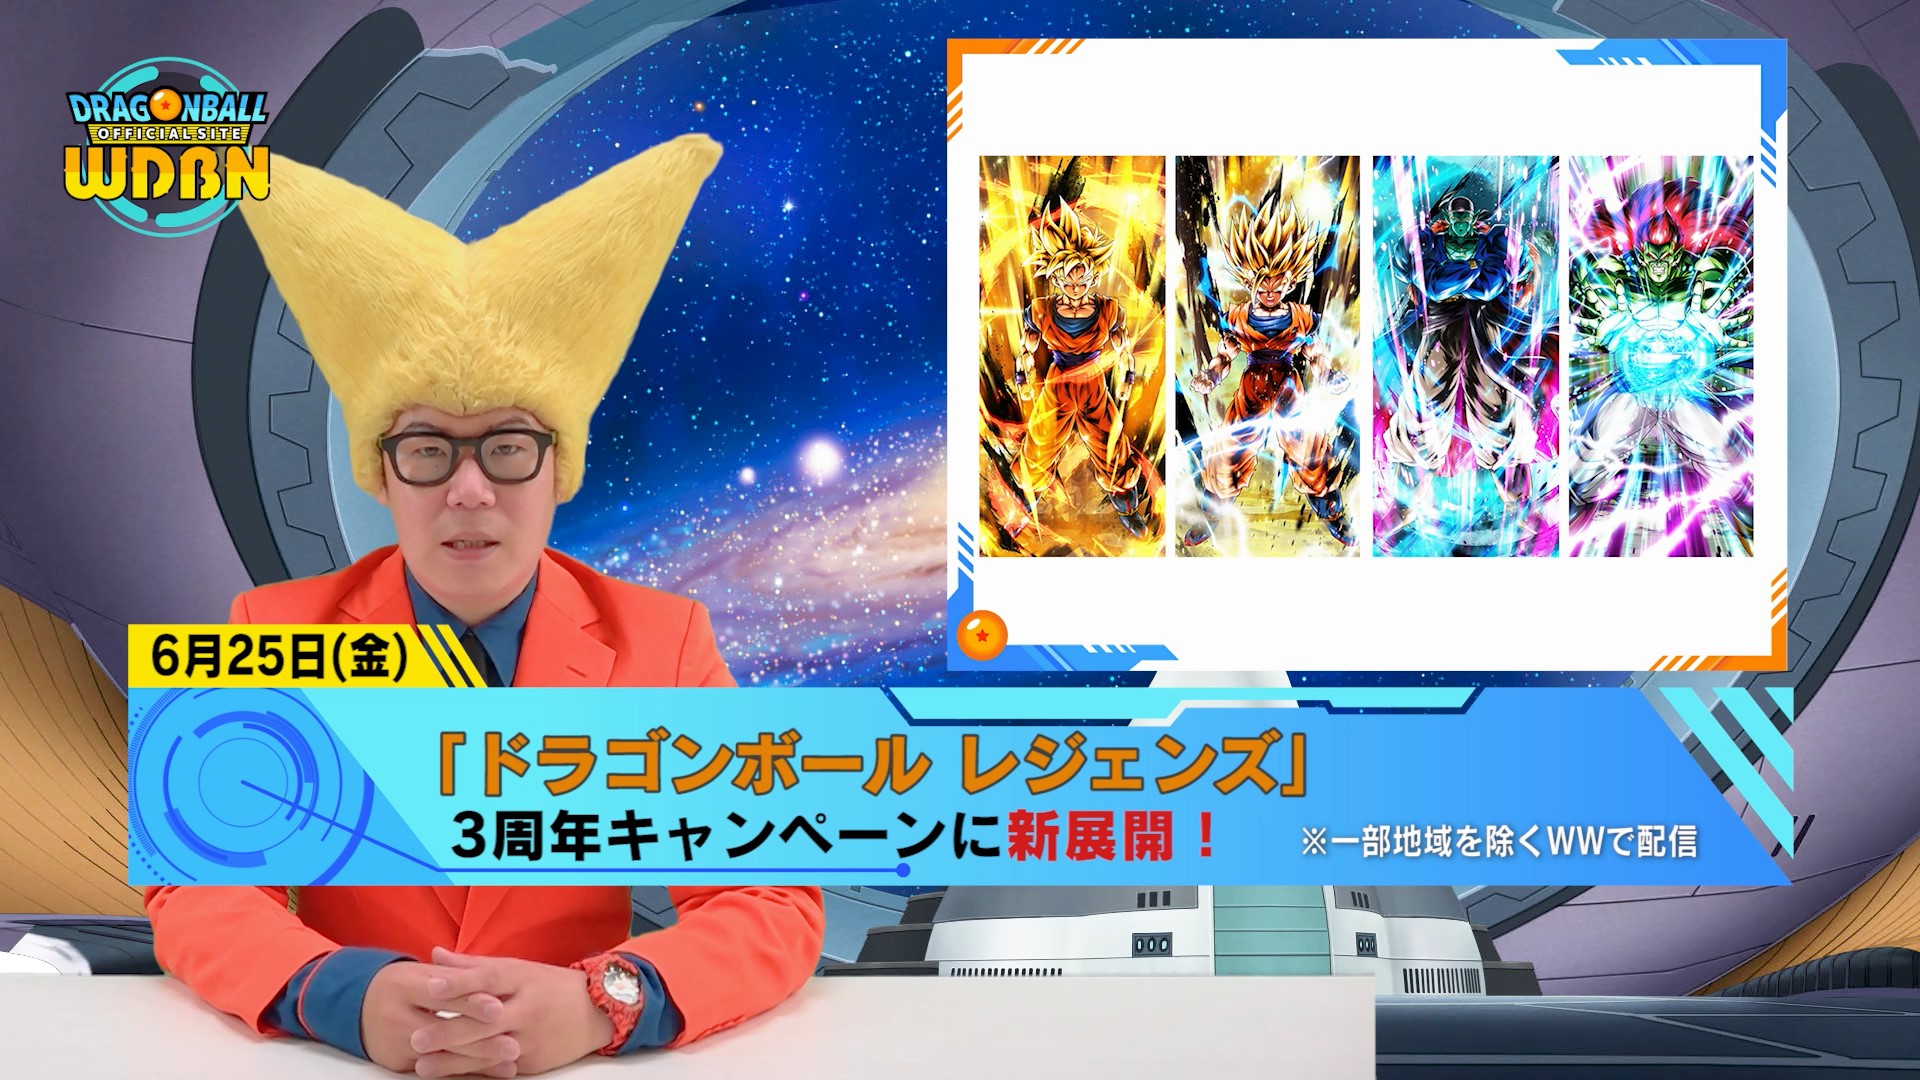 [June 28th] Weekly Dragon Ball News Broadcast!